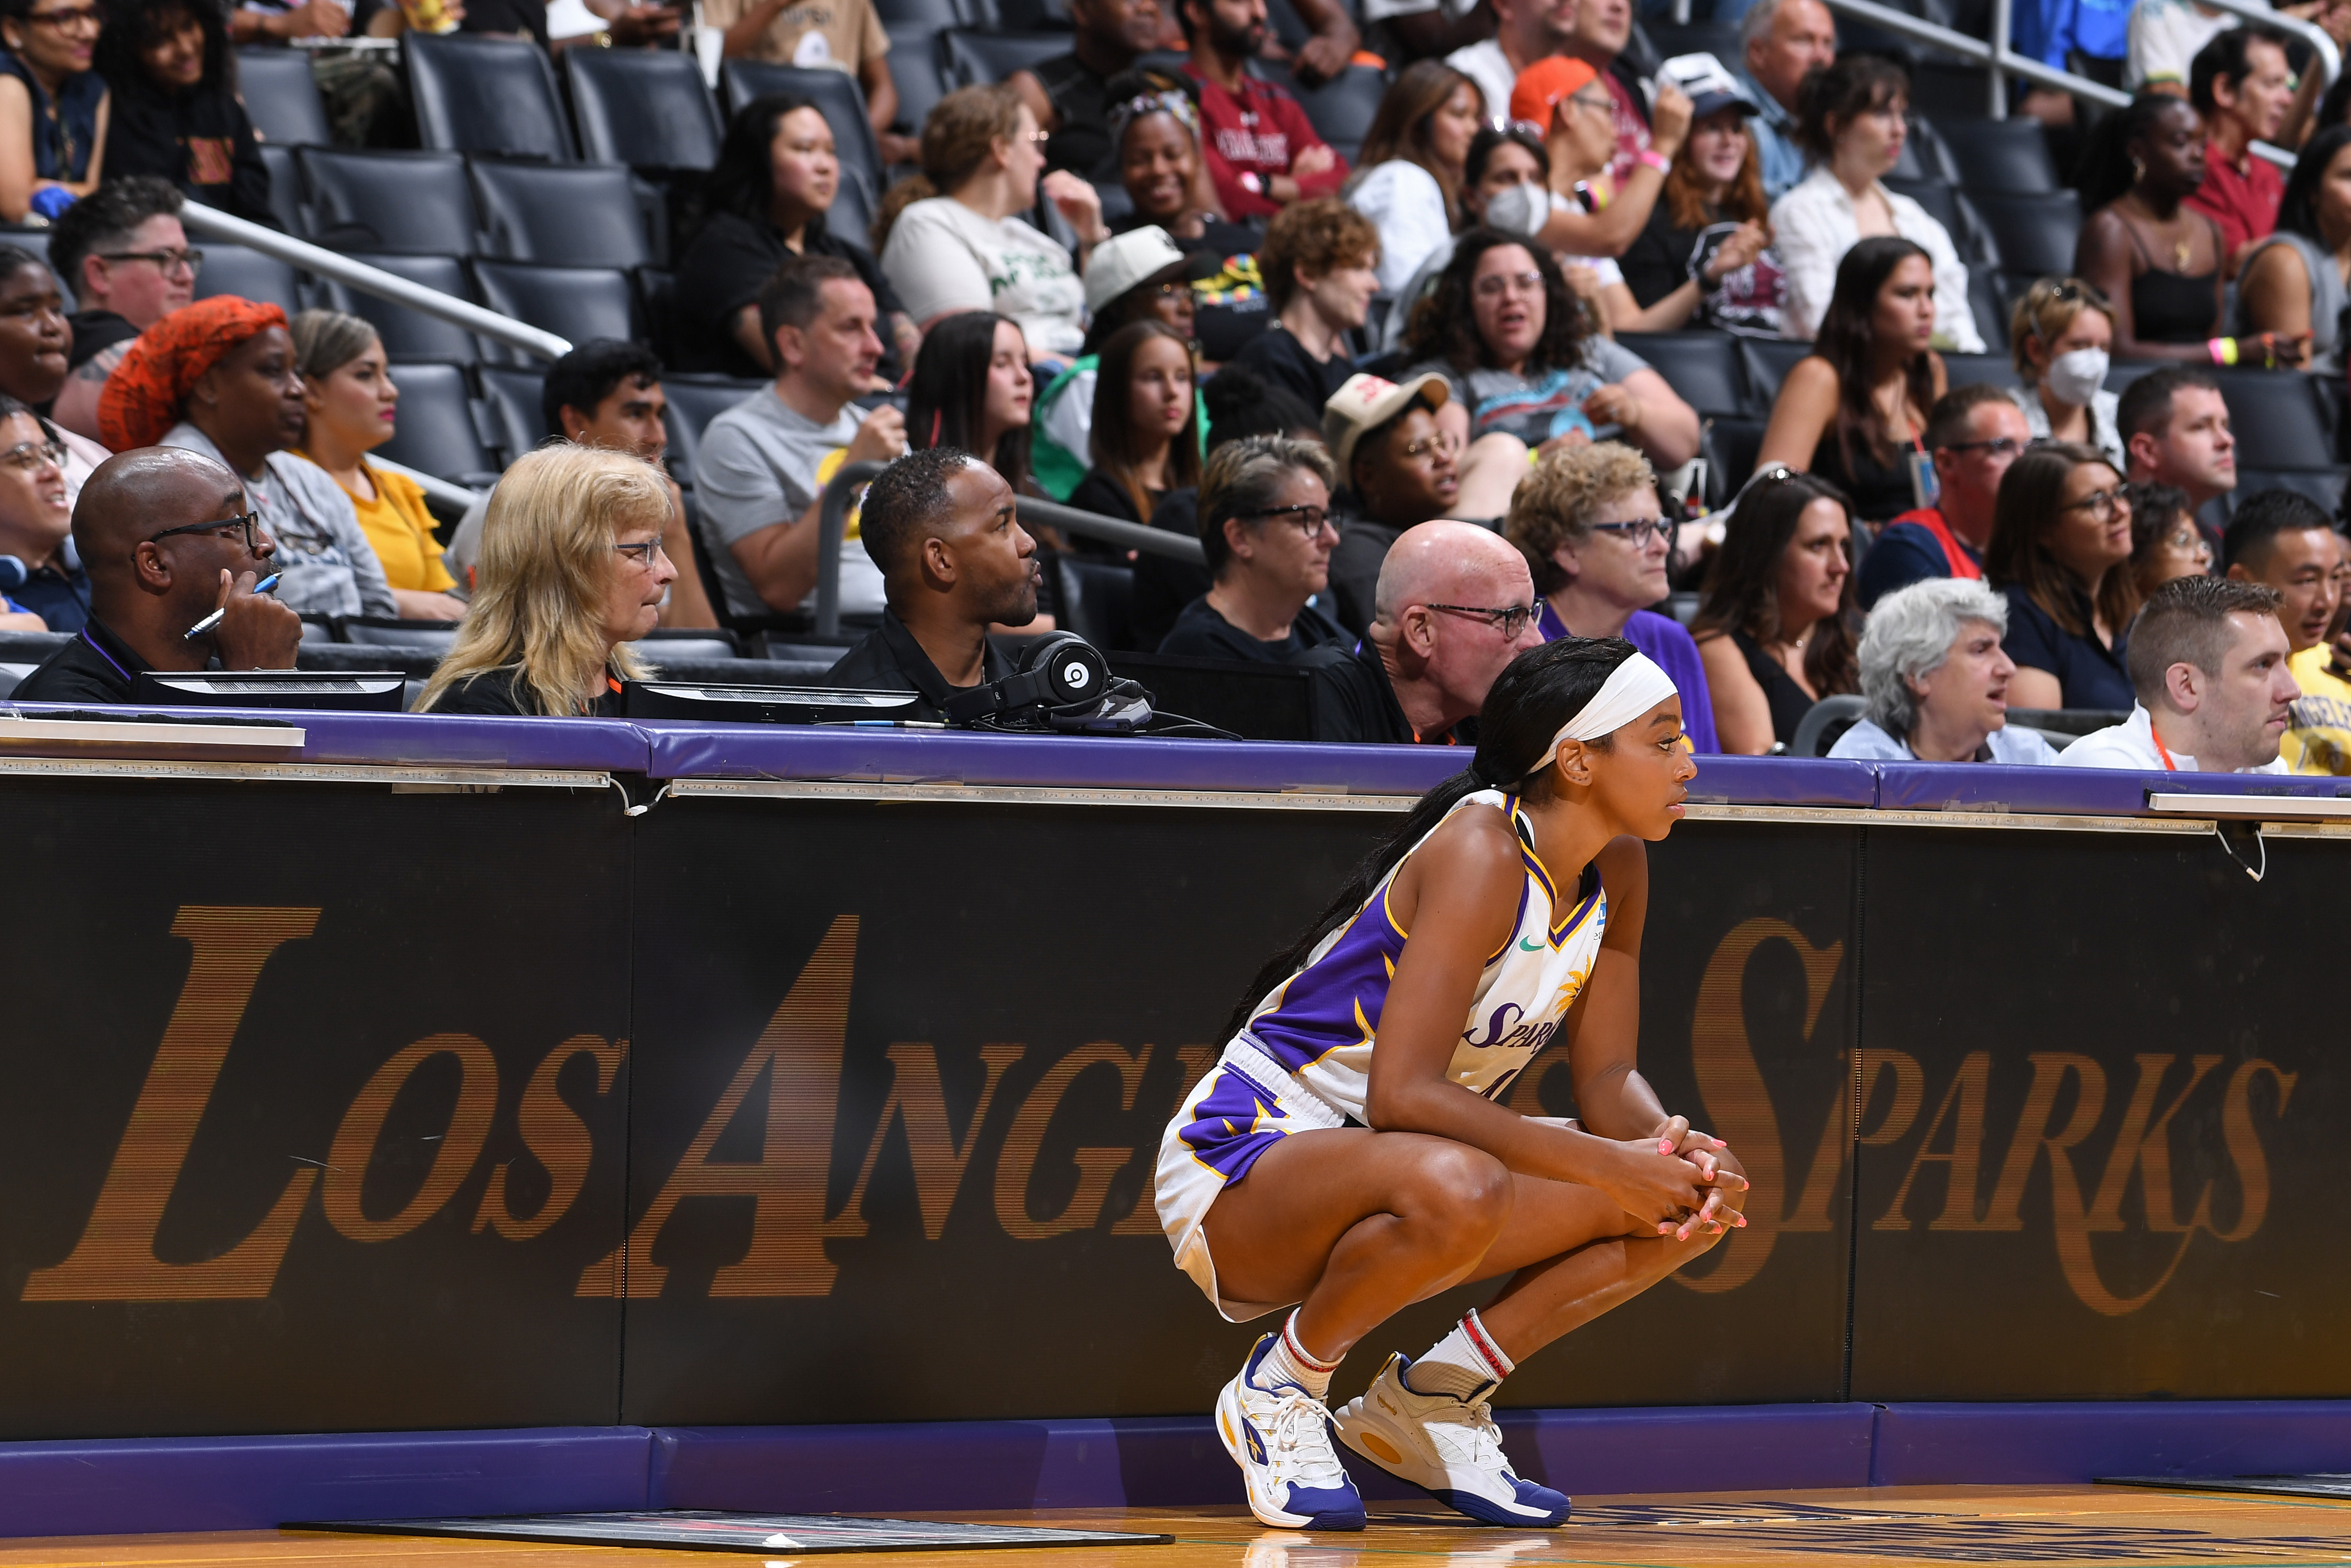 Guard Jordin Canada staying with hometown LA Sparks - The San